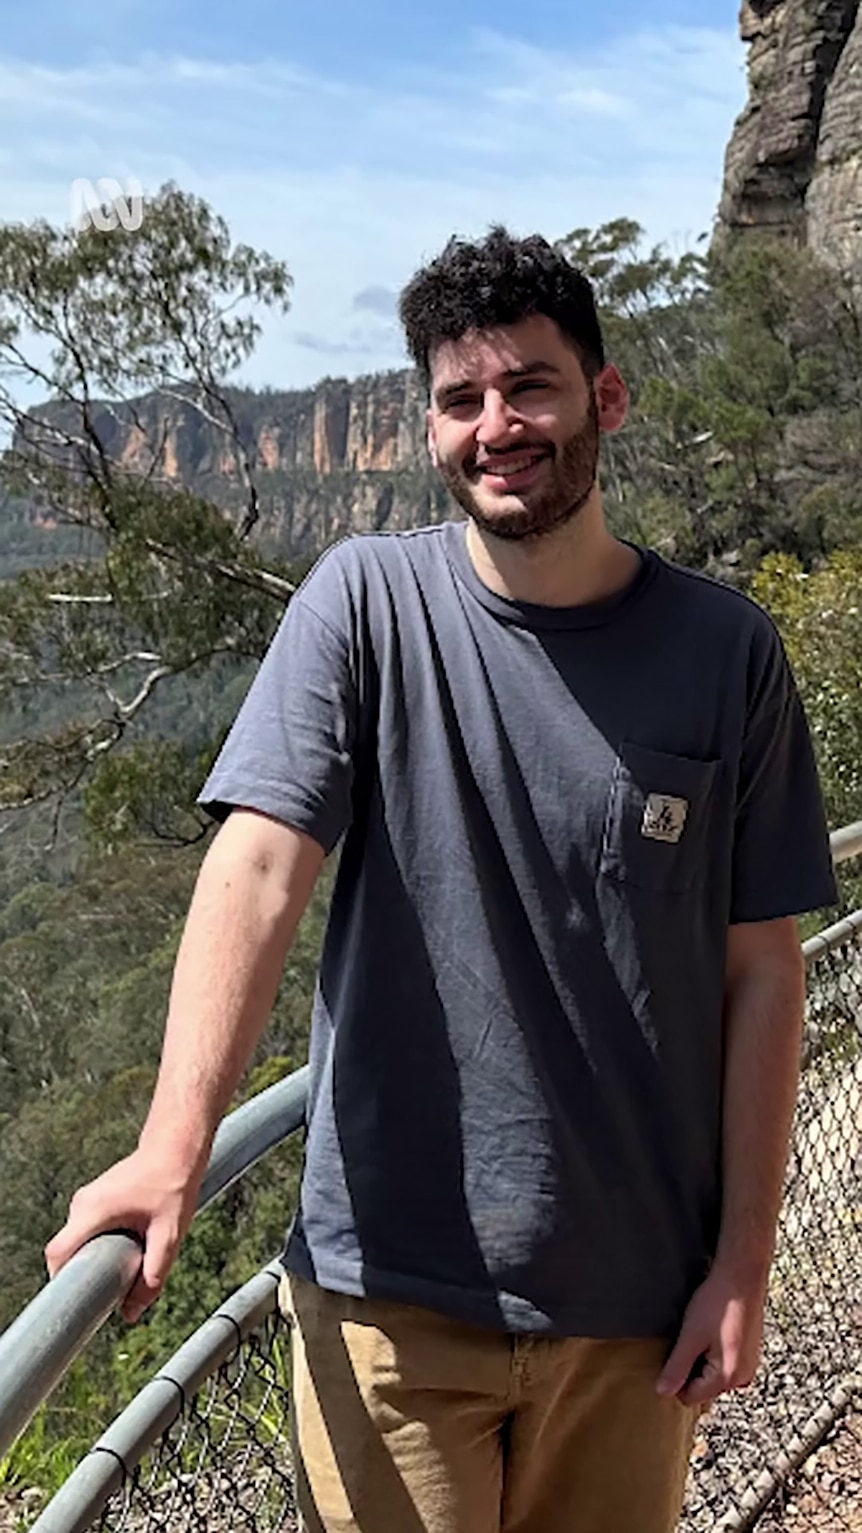 A young man with a beard poses in front of a lookout overlooking bushland.